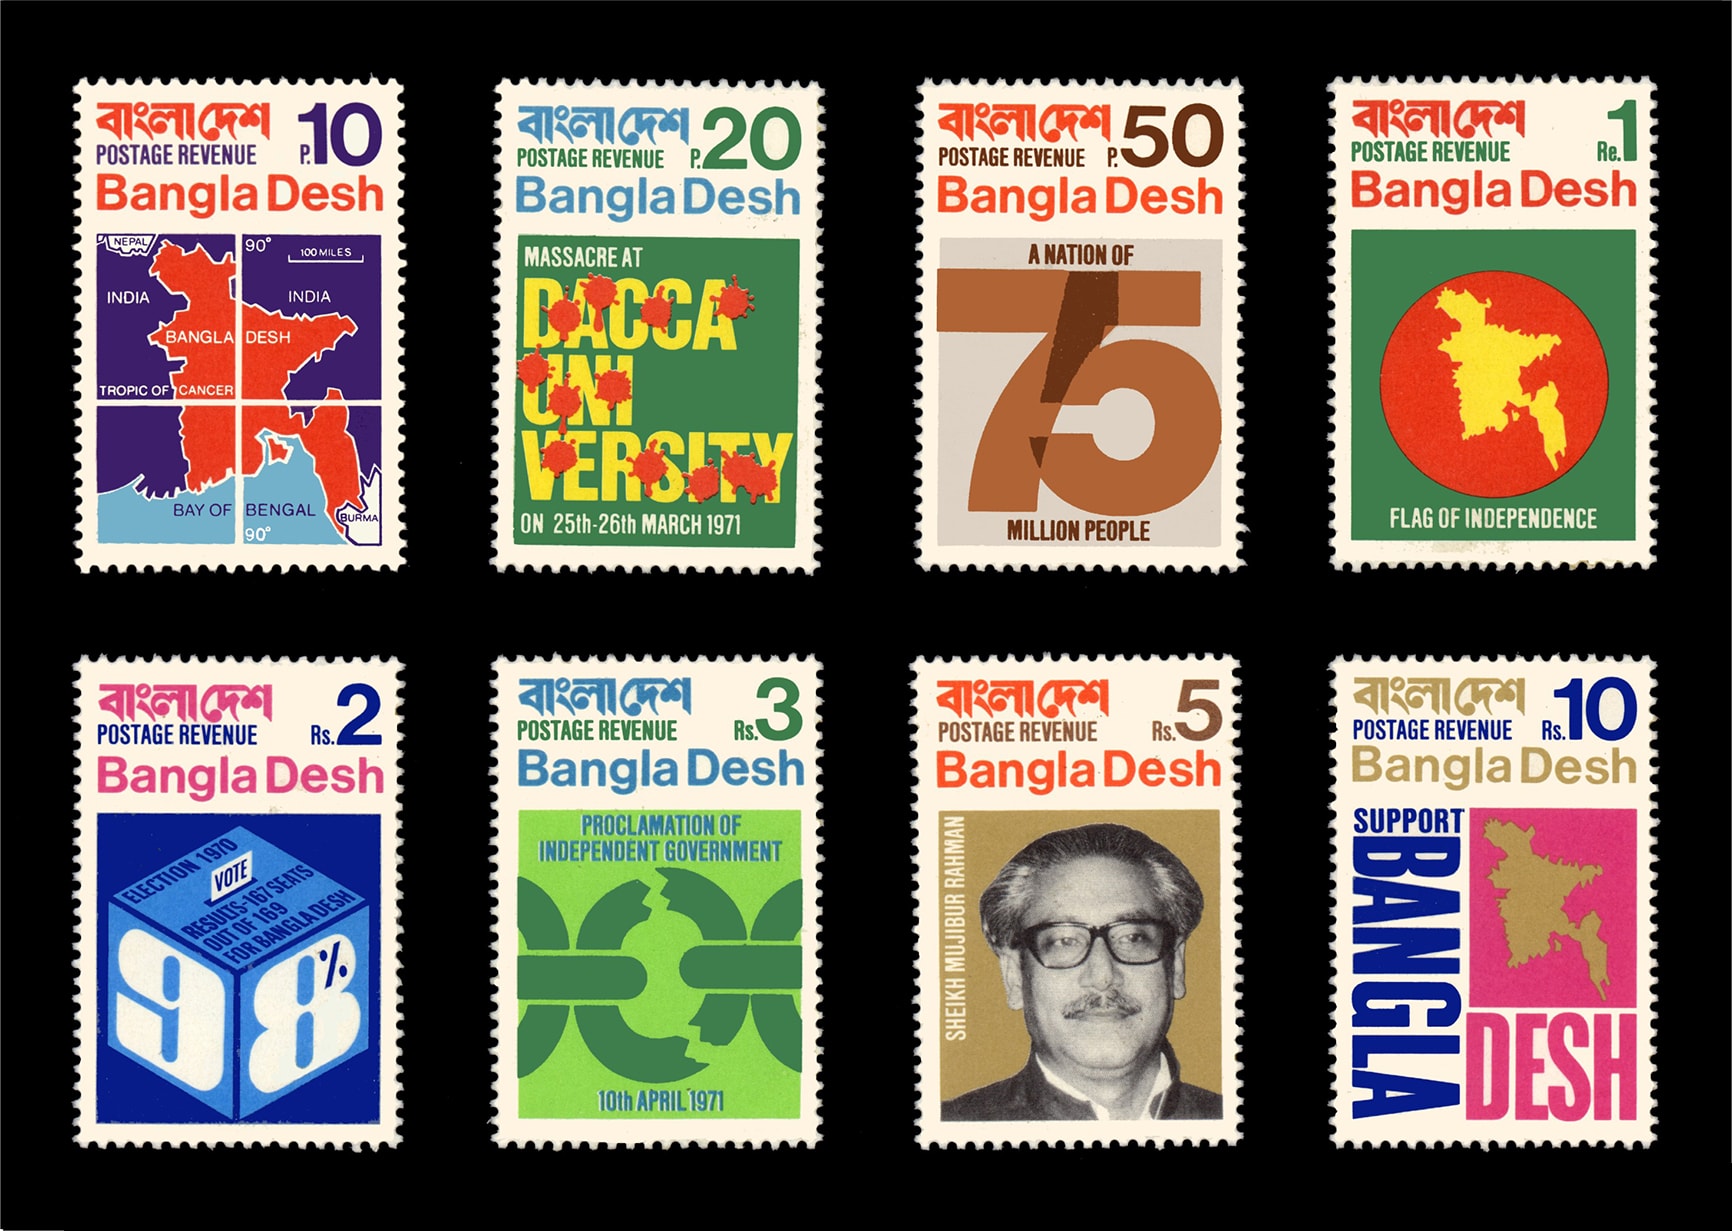 The first set of Bangladesh stamps designed by Biman Mullick